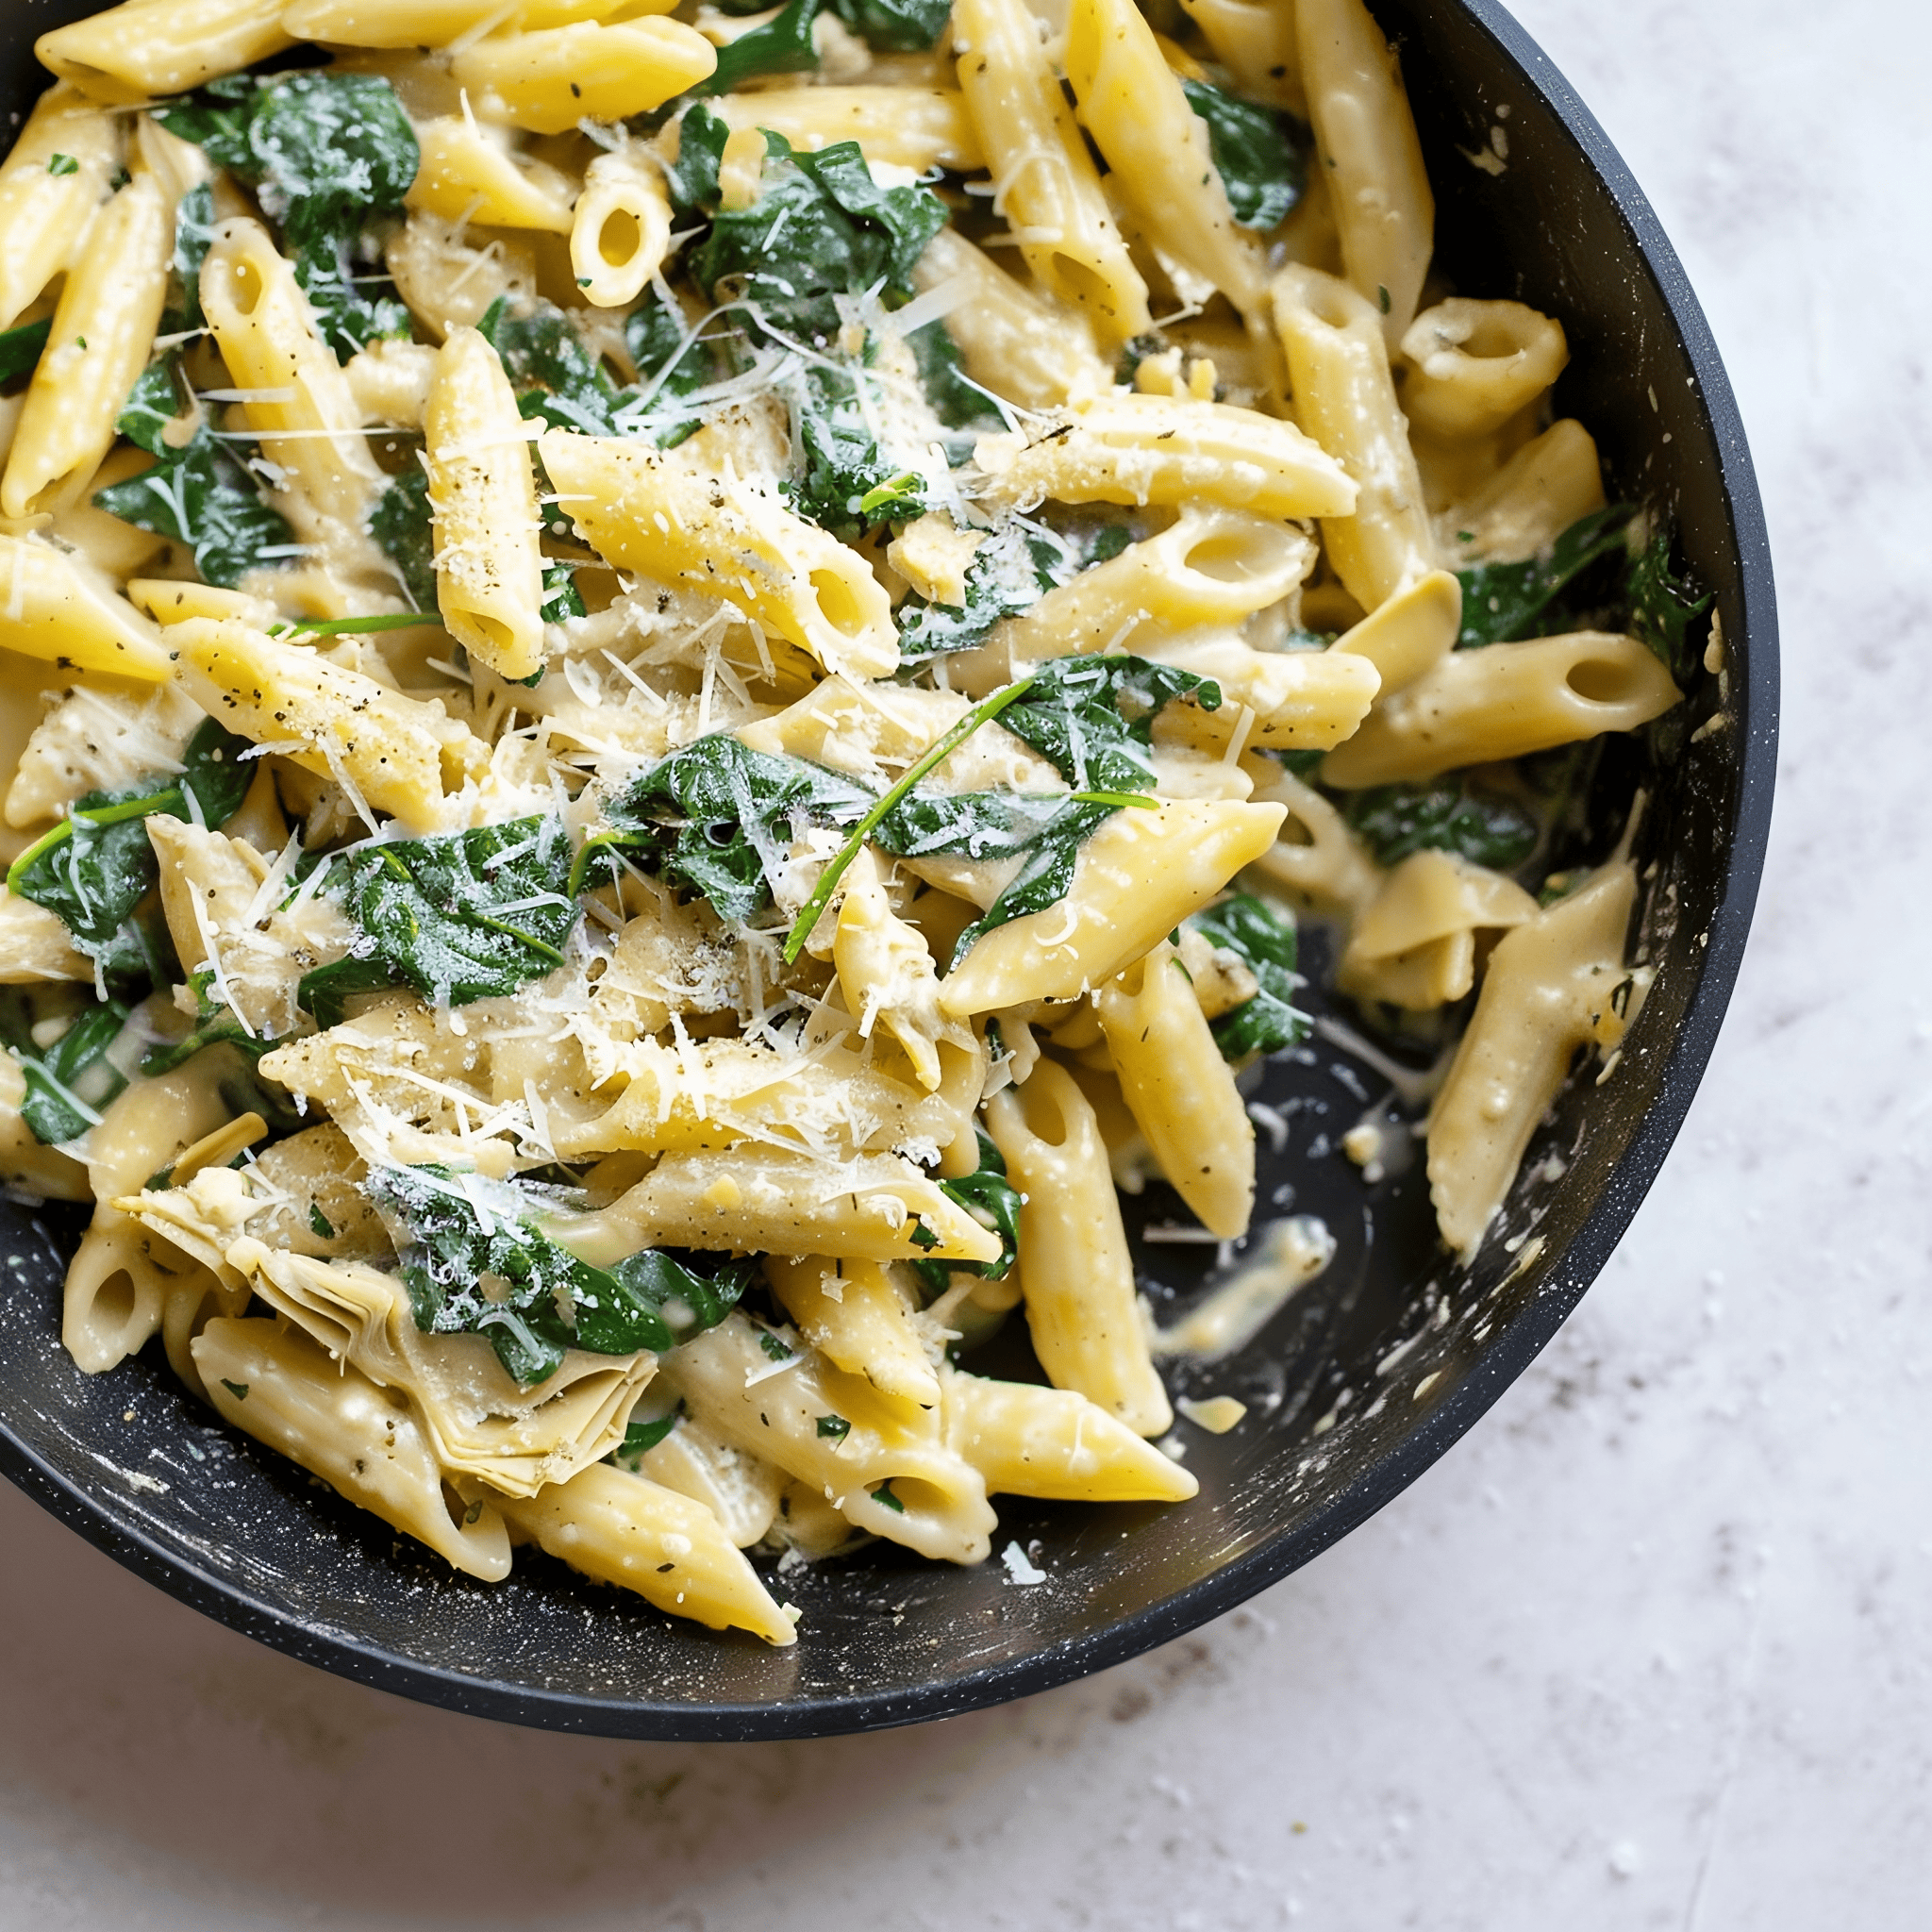 Creamy and cheesy spinach artichoke pasta topped with parmesan